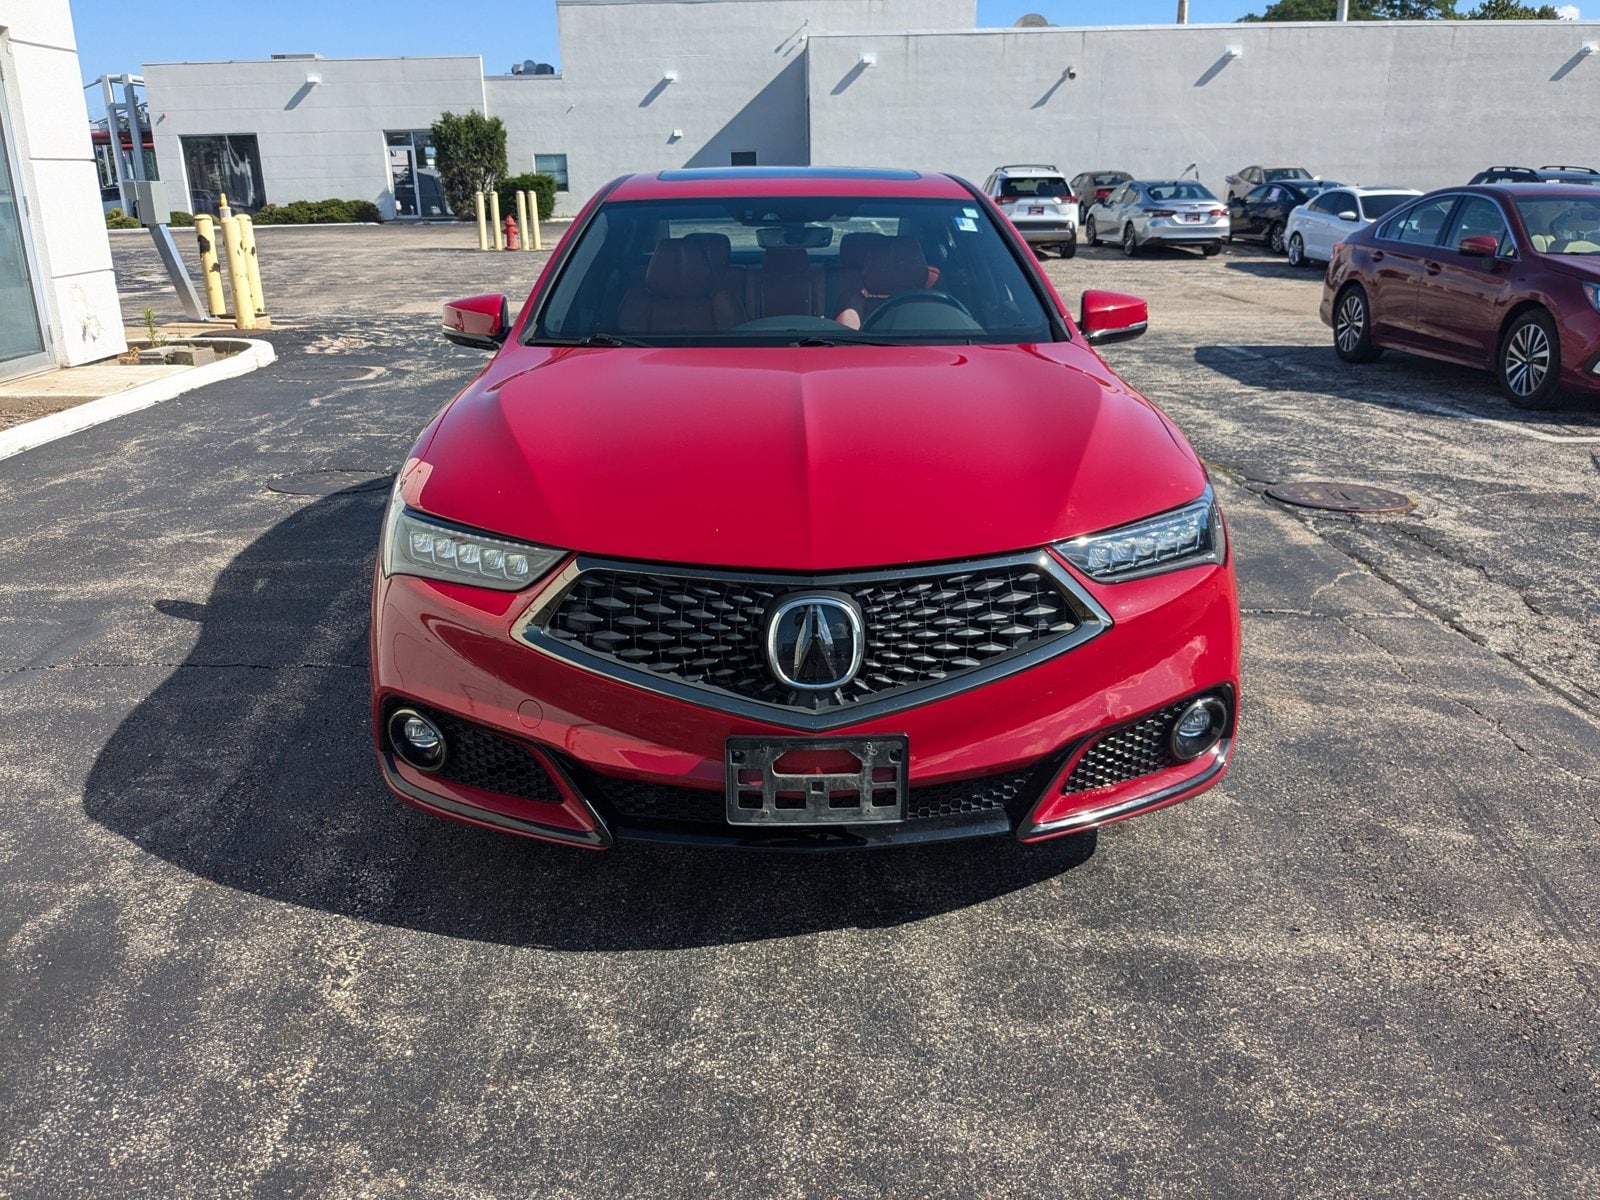 Used 2019 Acura TLX Technology & A-Spec Pack RED with VIN 19UUB1F62KA004577 for sale in Libertyville, IL